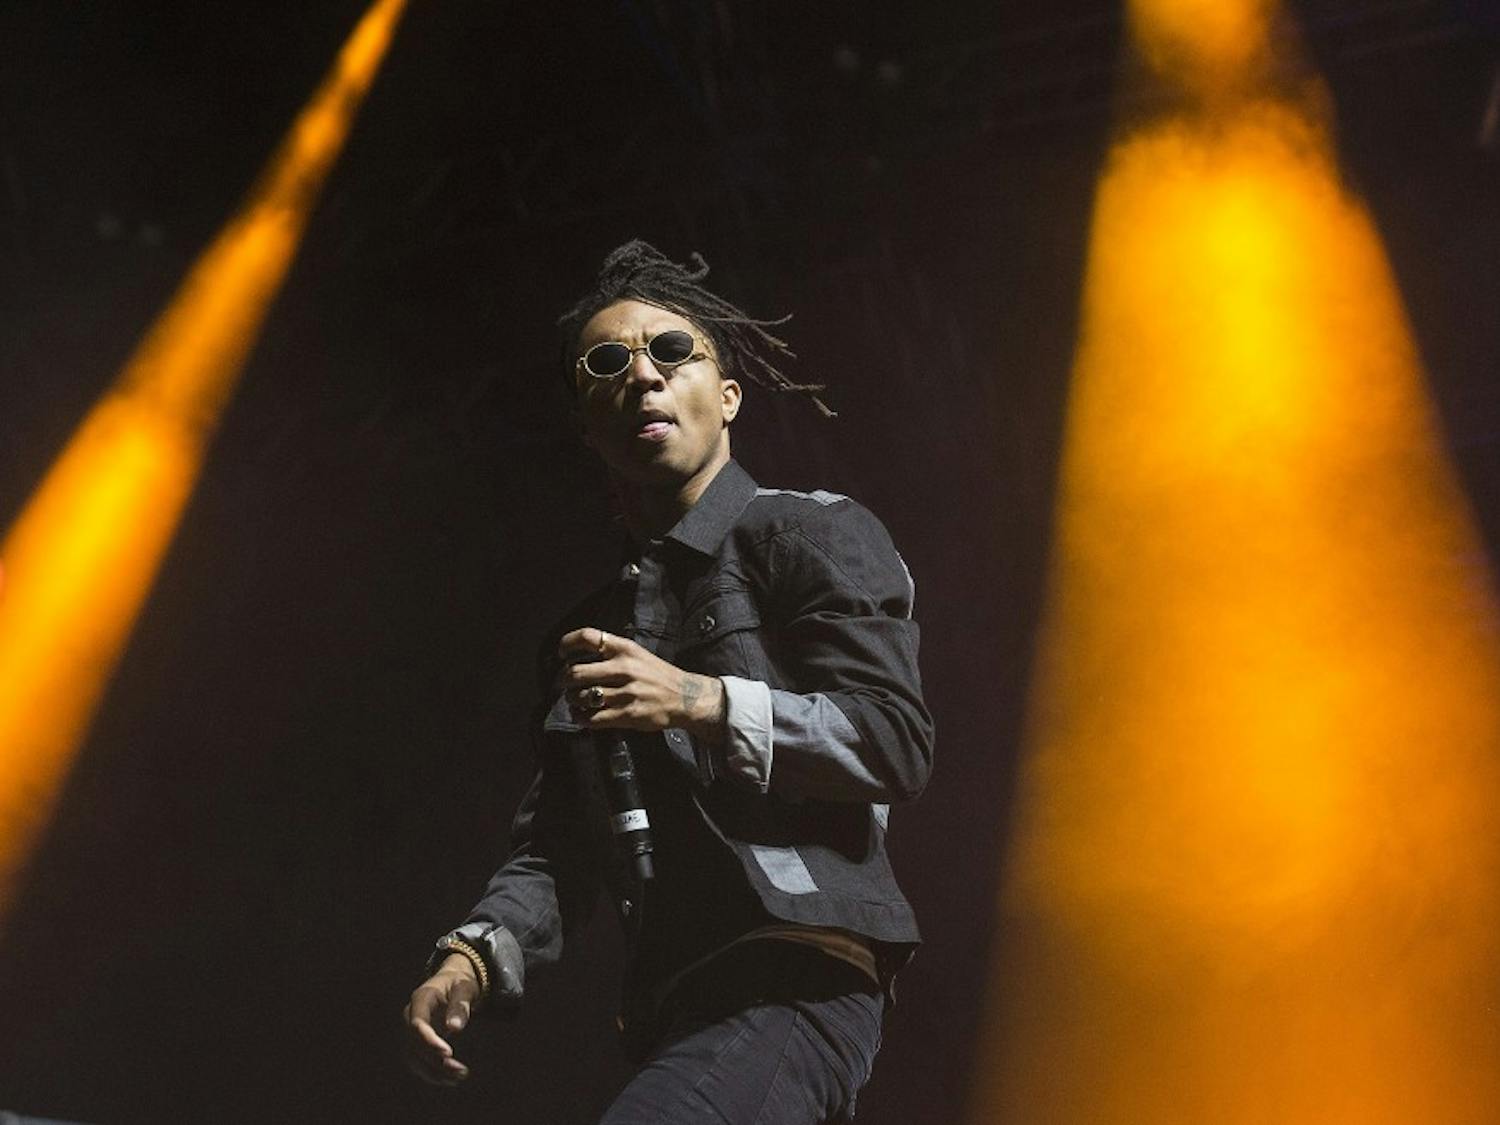 Rae Sremmurd's Swae Lee performs on the Sahara stage at the Coachella Music and Arts Festival in Indio, Calif., late on Friday, April 15, 2016. (Brian van der Brug/Los Angeles Times/TNS)